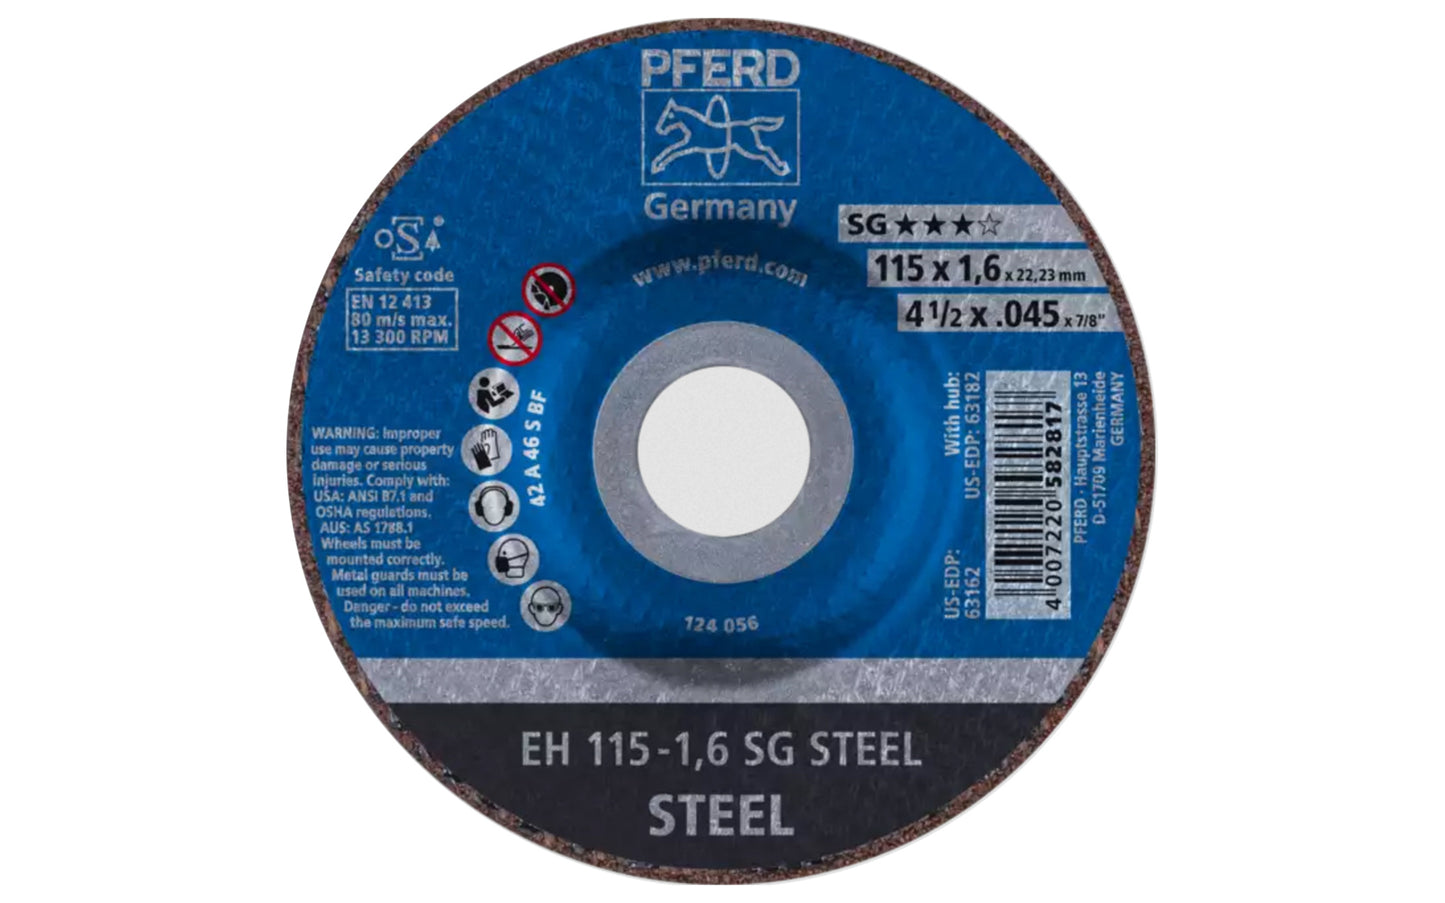 High quality 4-1/2" Cut-Off Wheel made by Pferd in Germany. Model 63162. Designed for steel, cutting of sheet metal, sections, cutting solid material. Fast cutting action. 4-1/2" diameter. 7/8" Arbor. .045" thickness of blade - Thin Cut Blade. 4007220582817. Made in Germany.